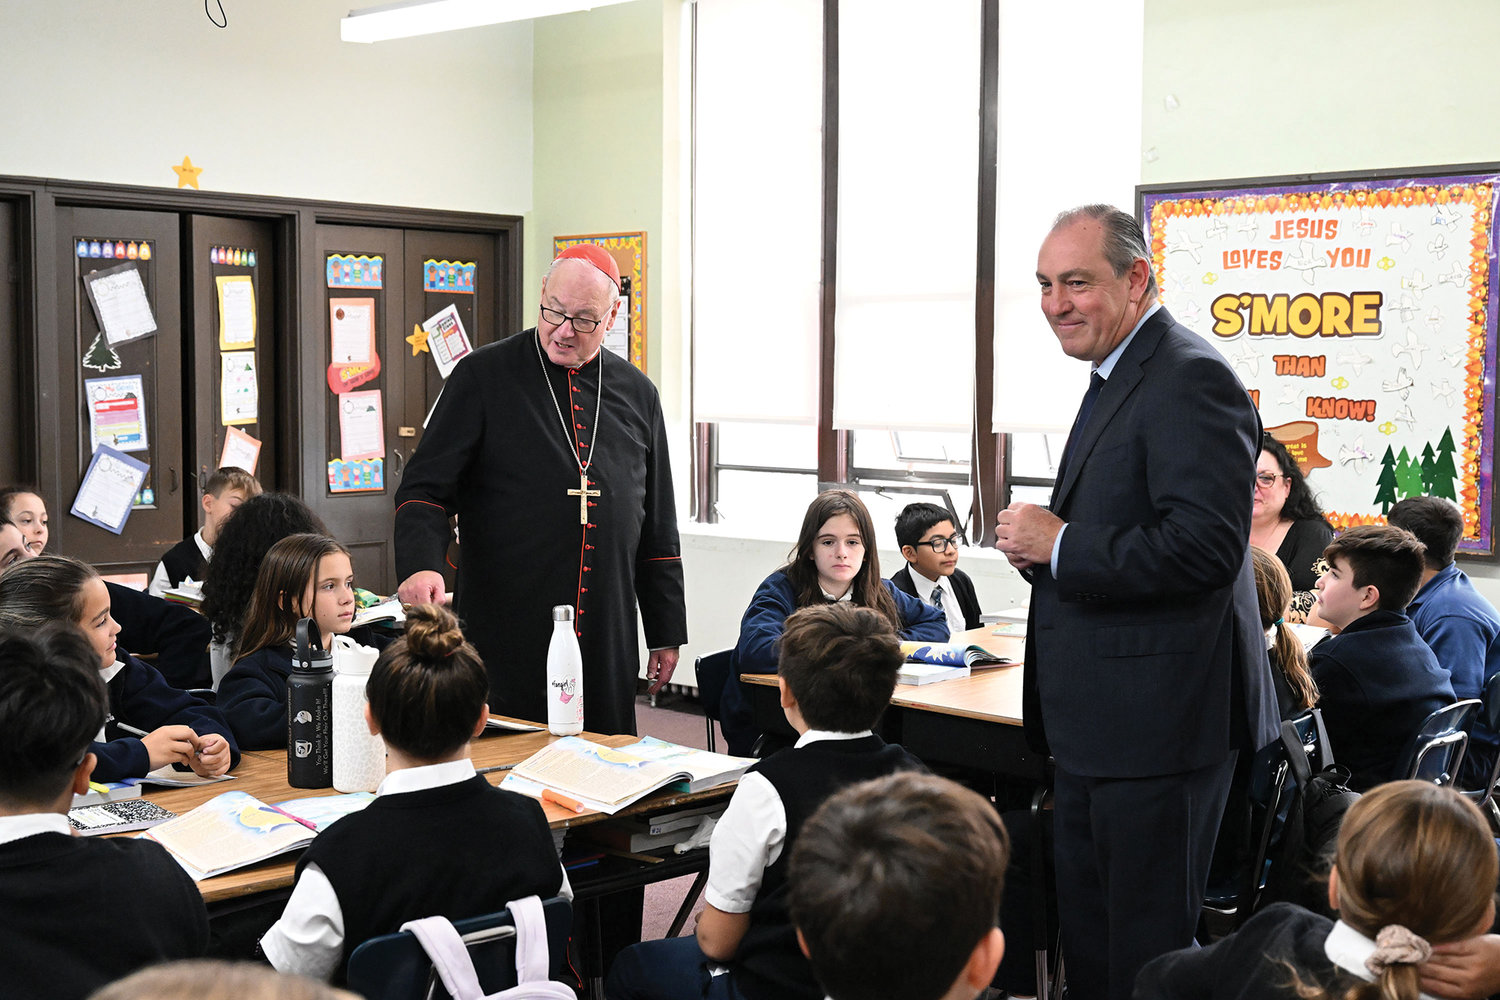 ASSISTING CATHOLIC SCHOOLS—Cardinal Dolan and Staten Island Borough President Vito J. Fossella visit a classroom at Blessed Sacrament School on Staten Island Oct. 24 after Fossella announced $457,300 in funding to sports and arts programs for all students at 21 Catholic schools in the borough.